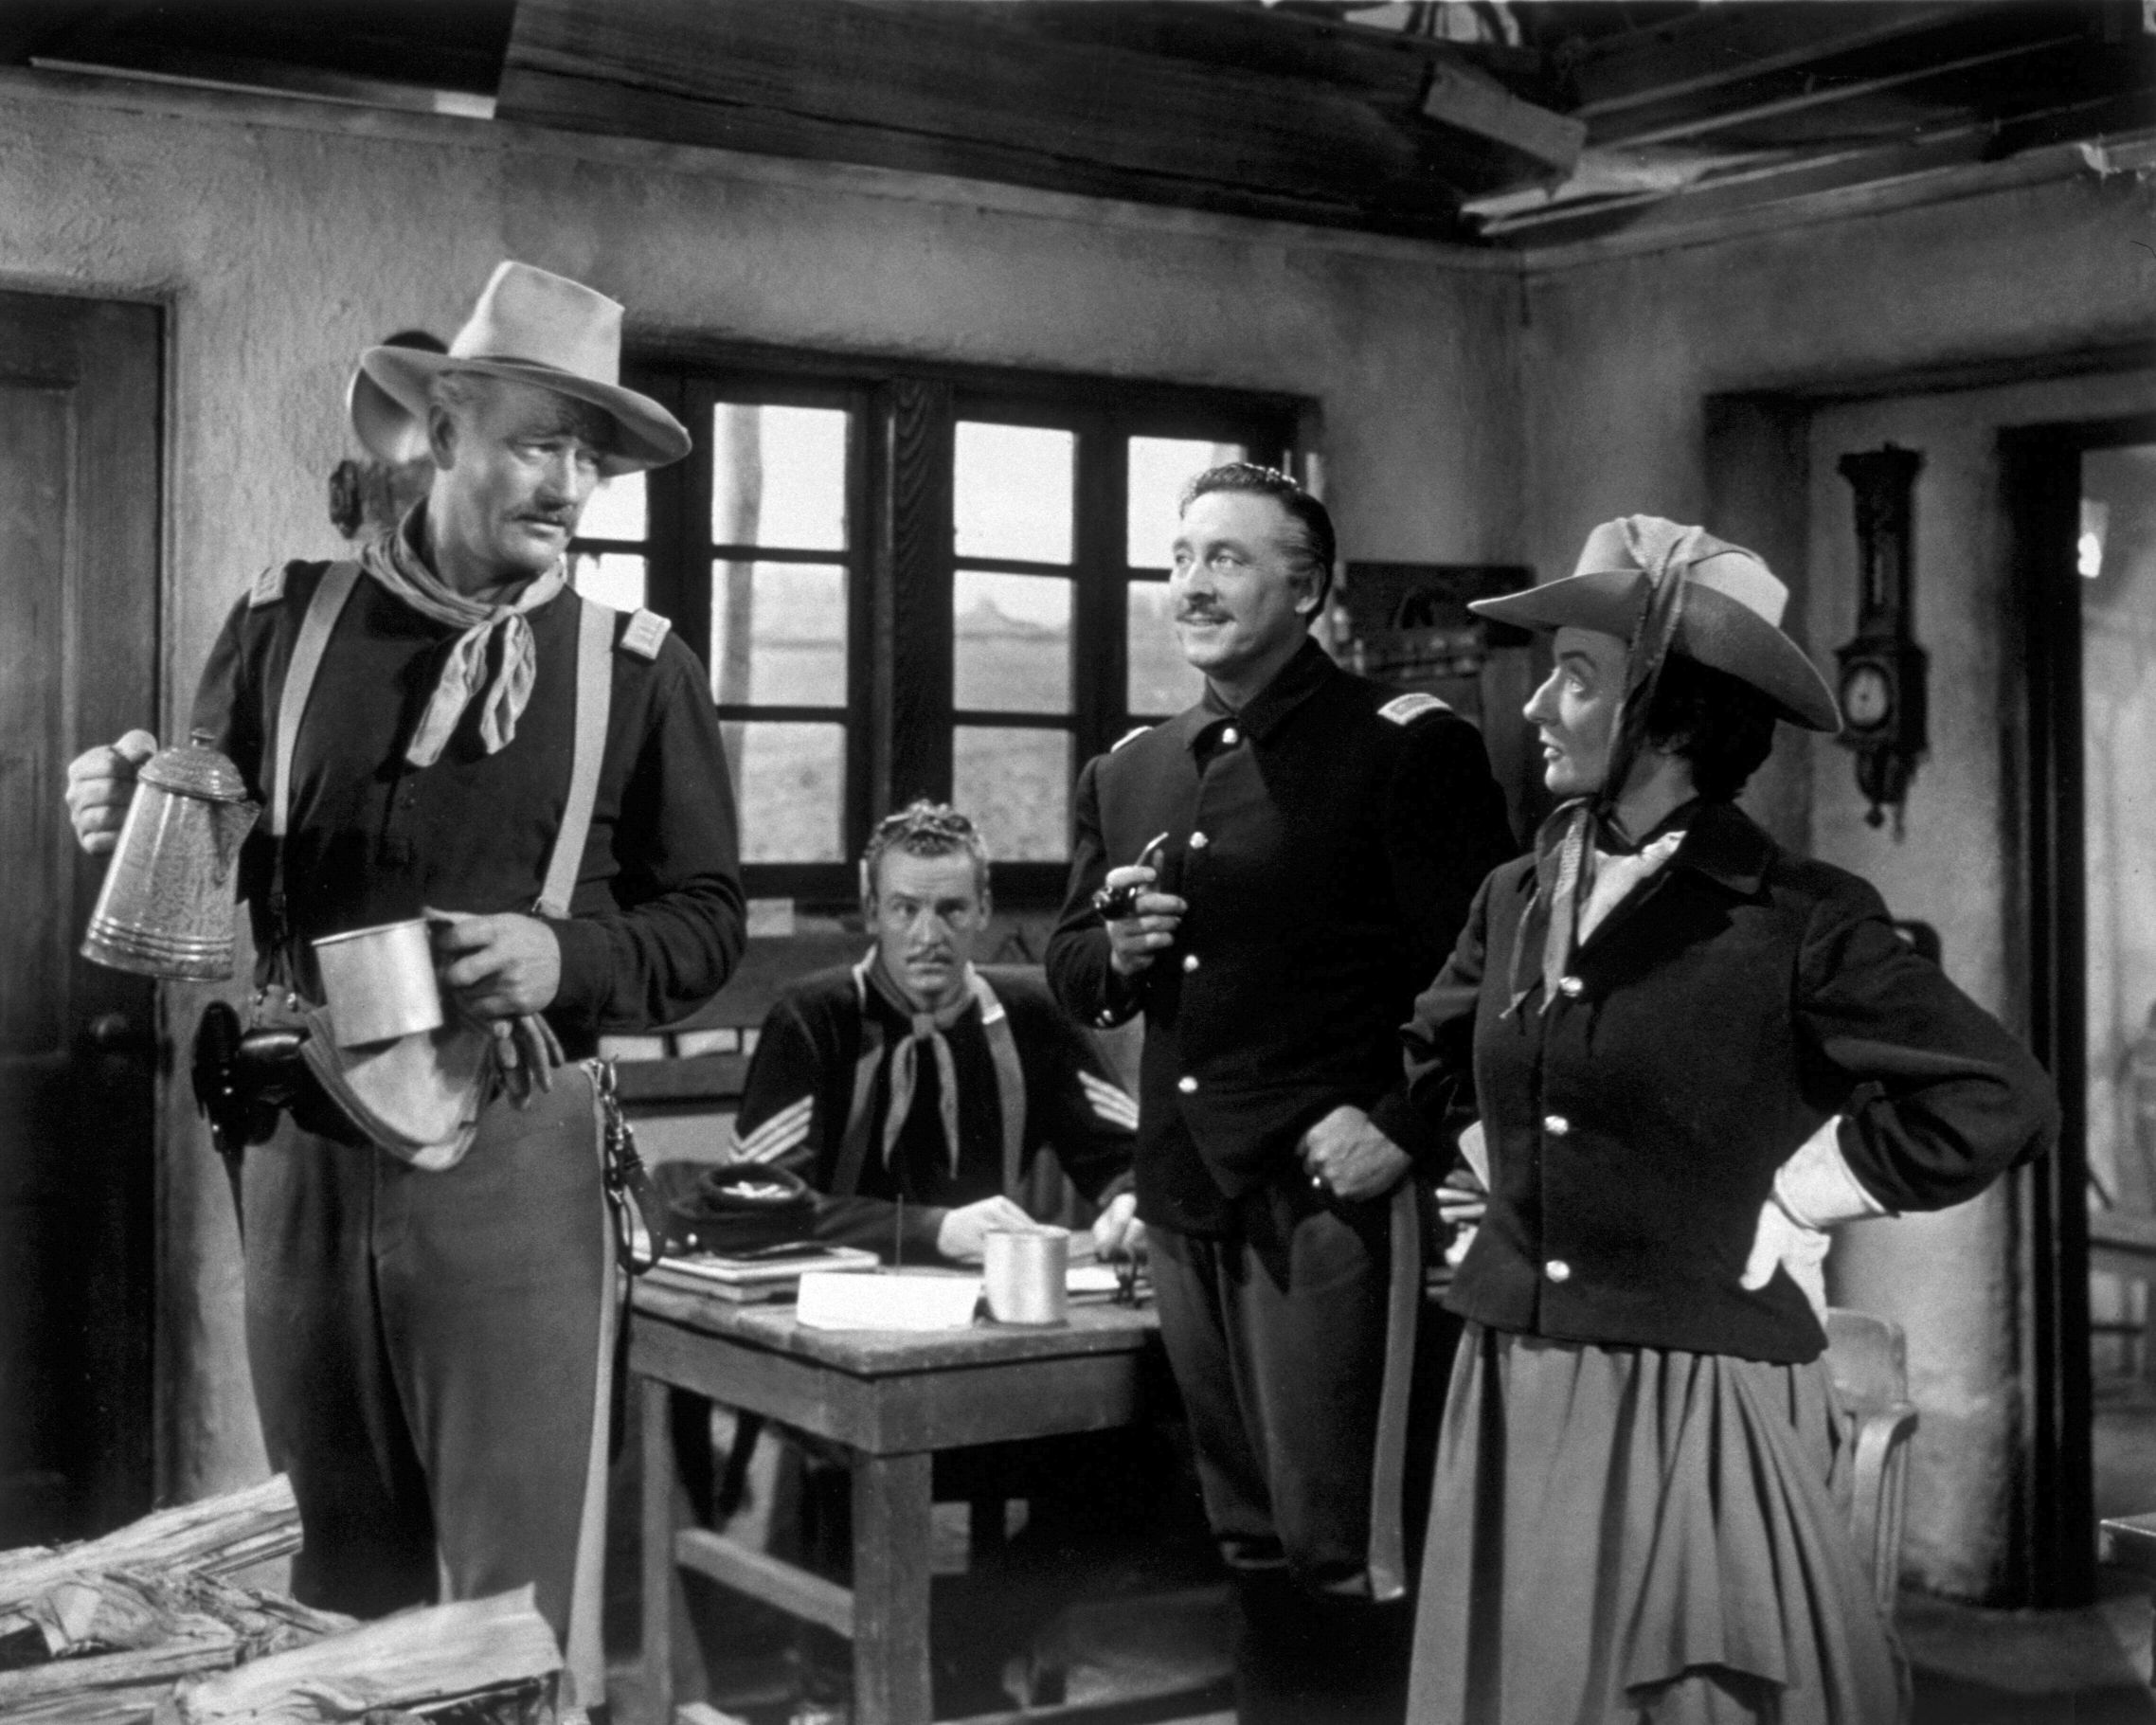 John Wayne and Mildred Natwick in She Wore A Yellow Ribbon near a window